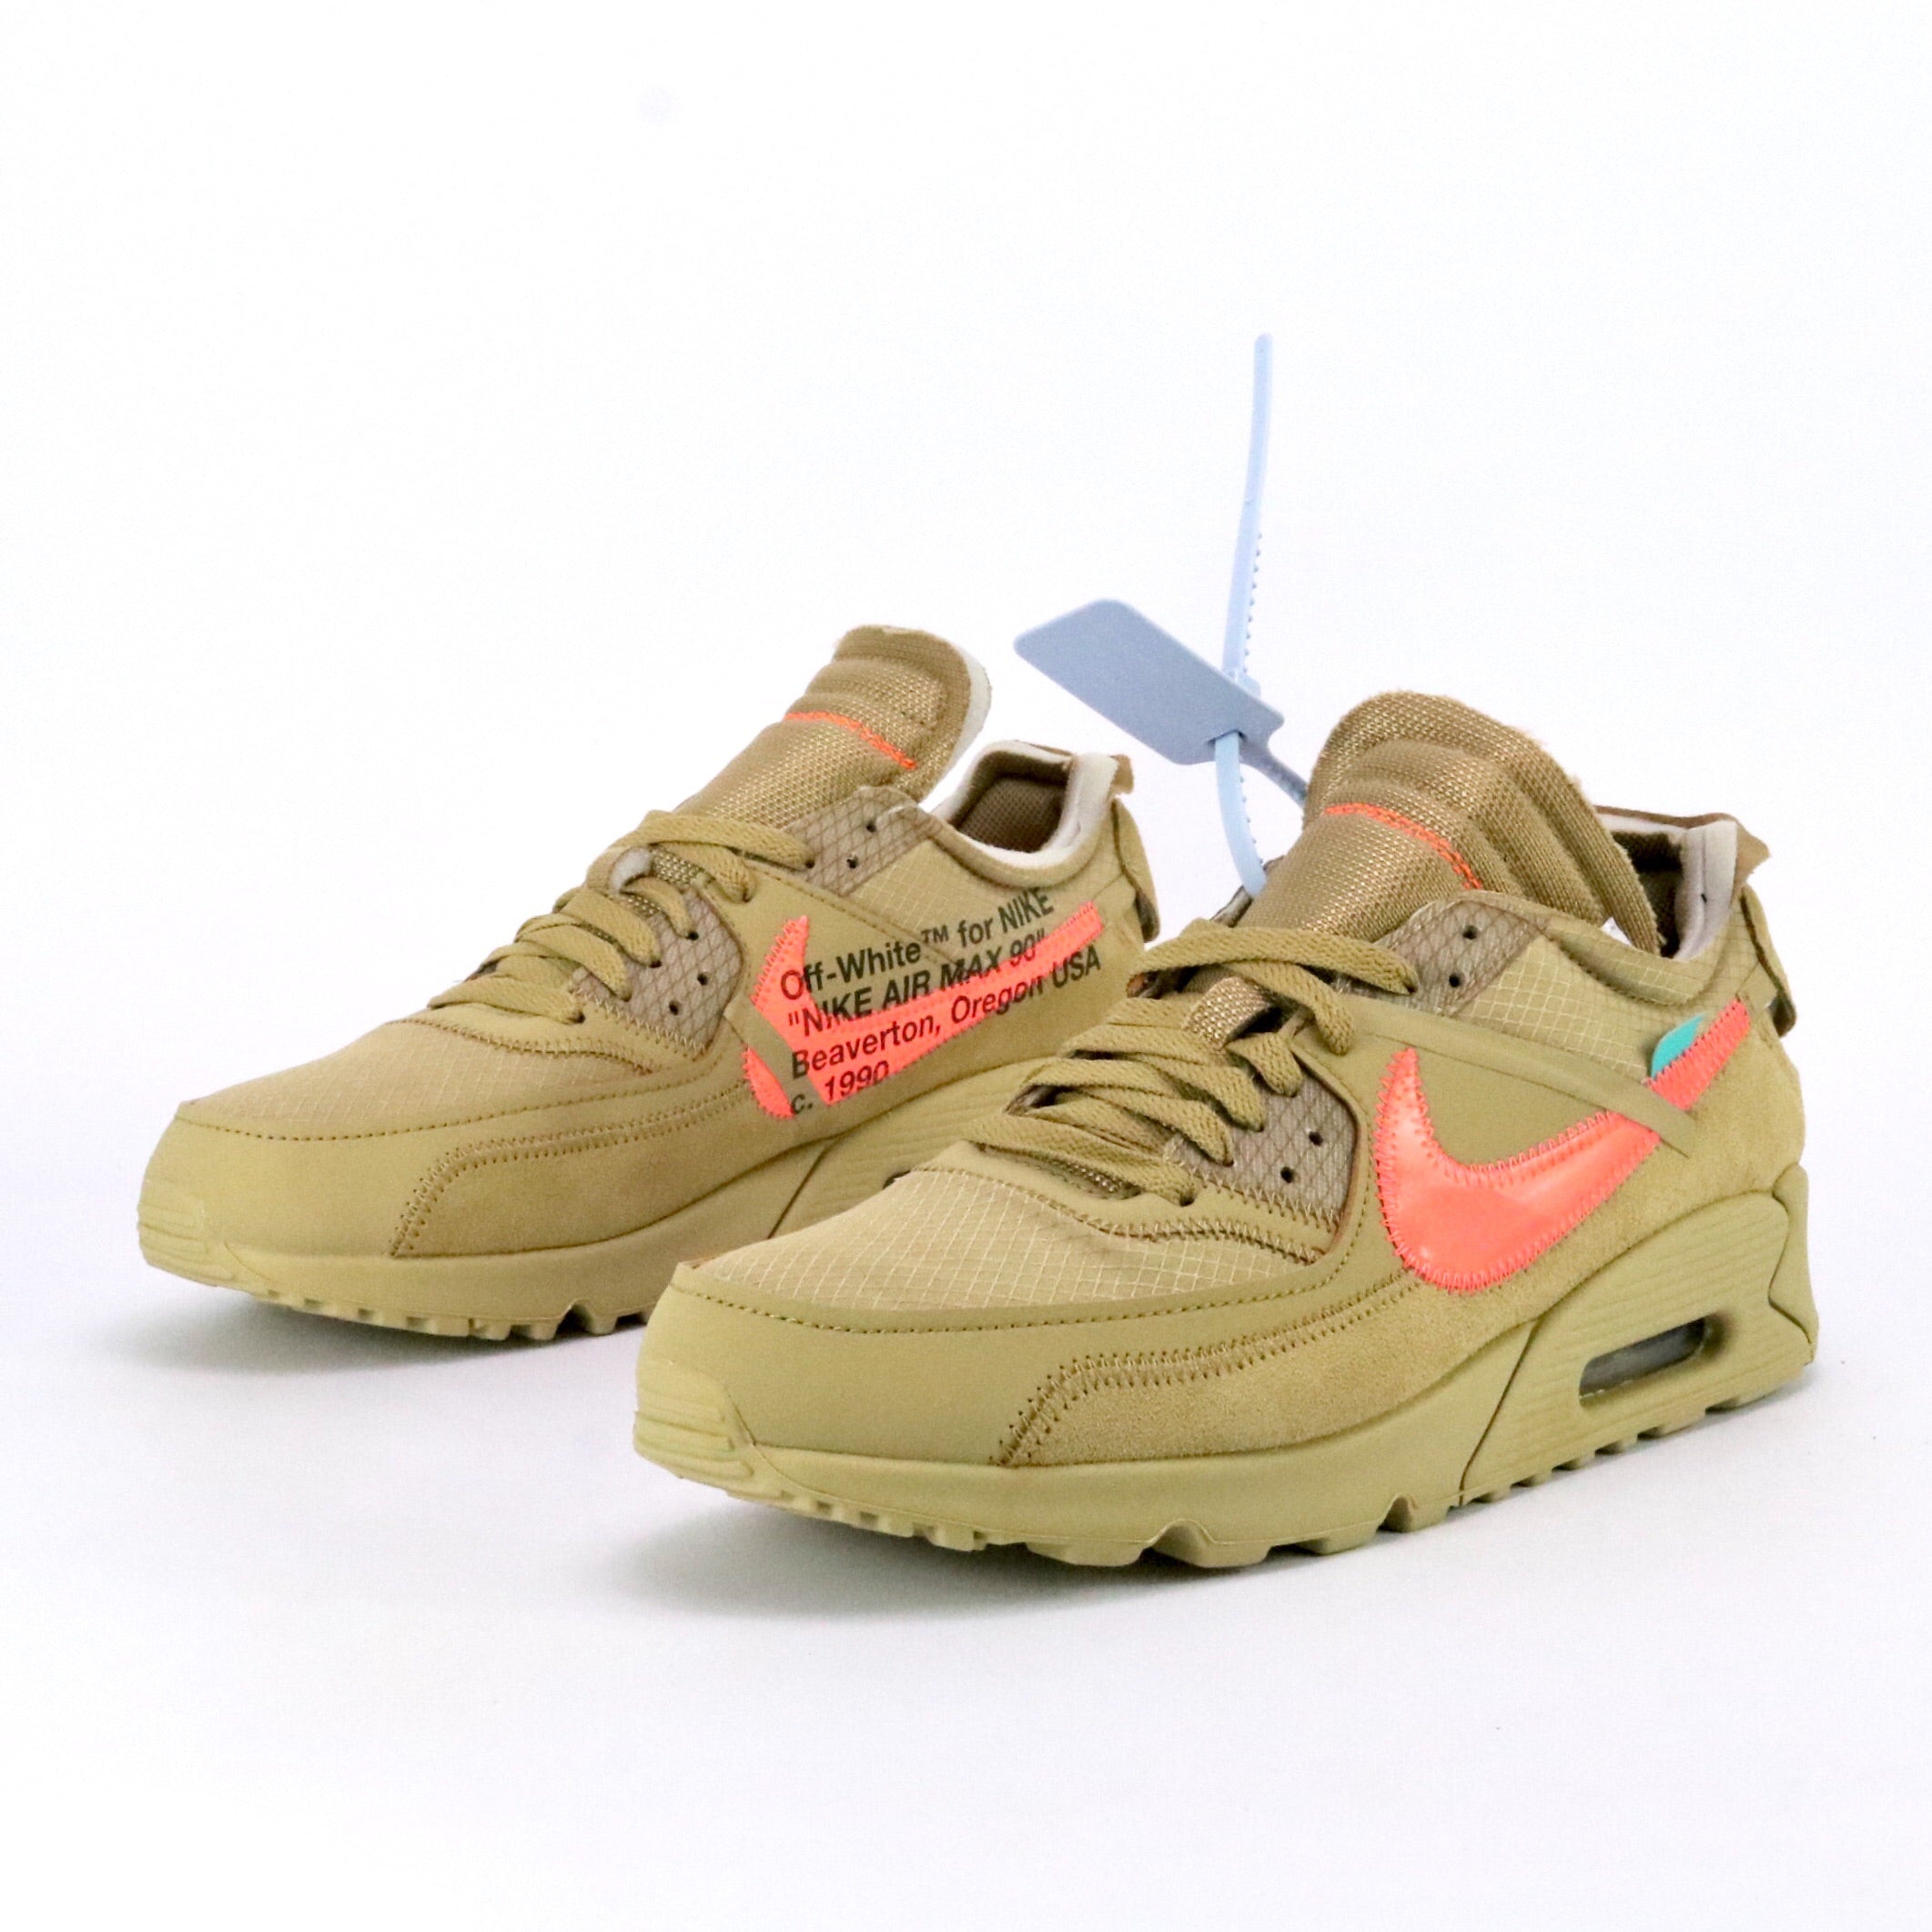 Dyster skrivning Wreck OFF WHITE x Nike Air Max 90 Desert Ore – SoleMate Sneakers